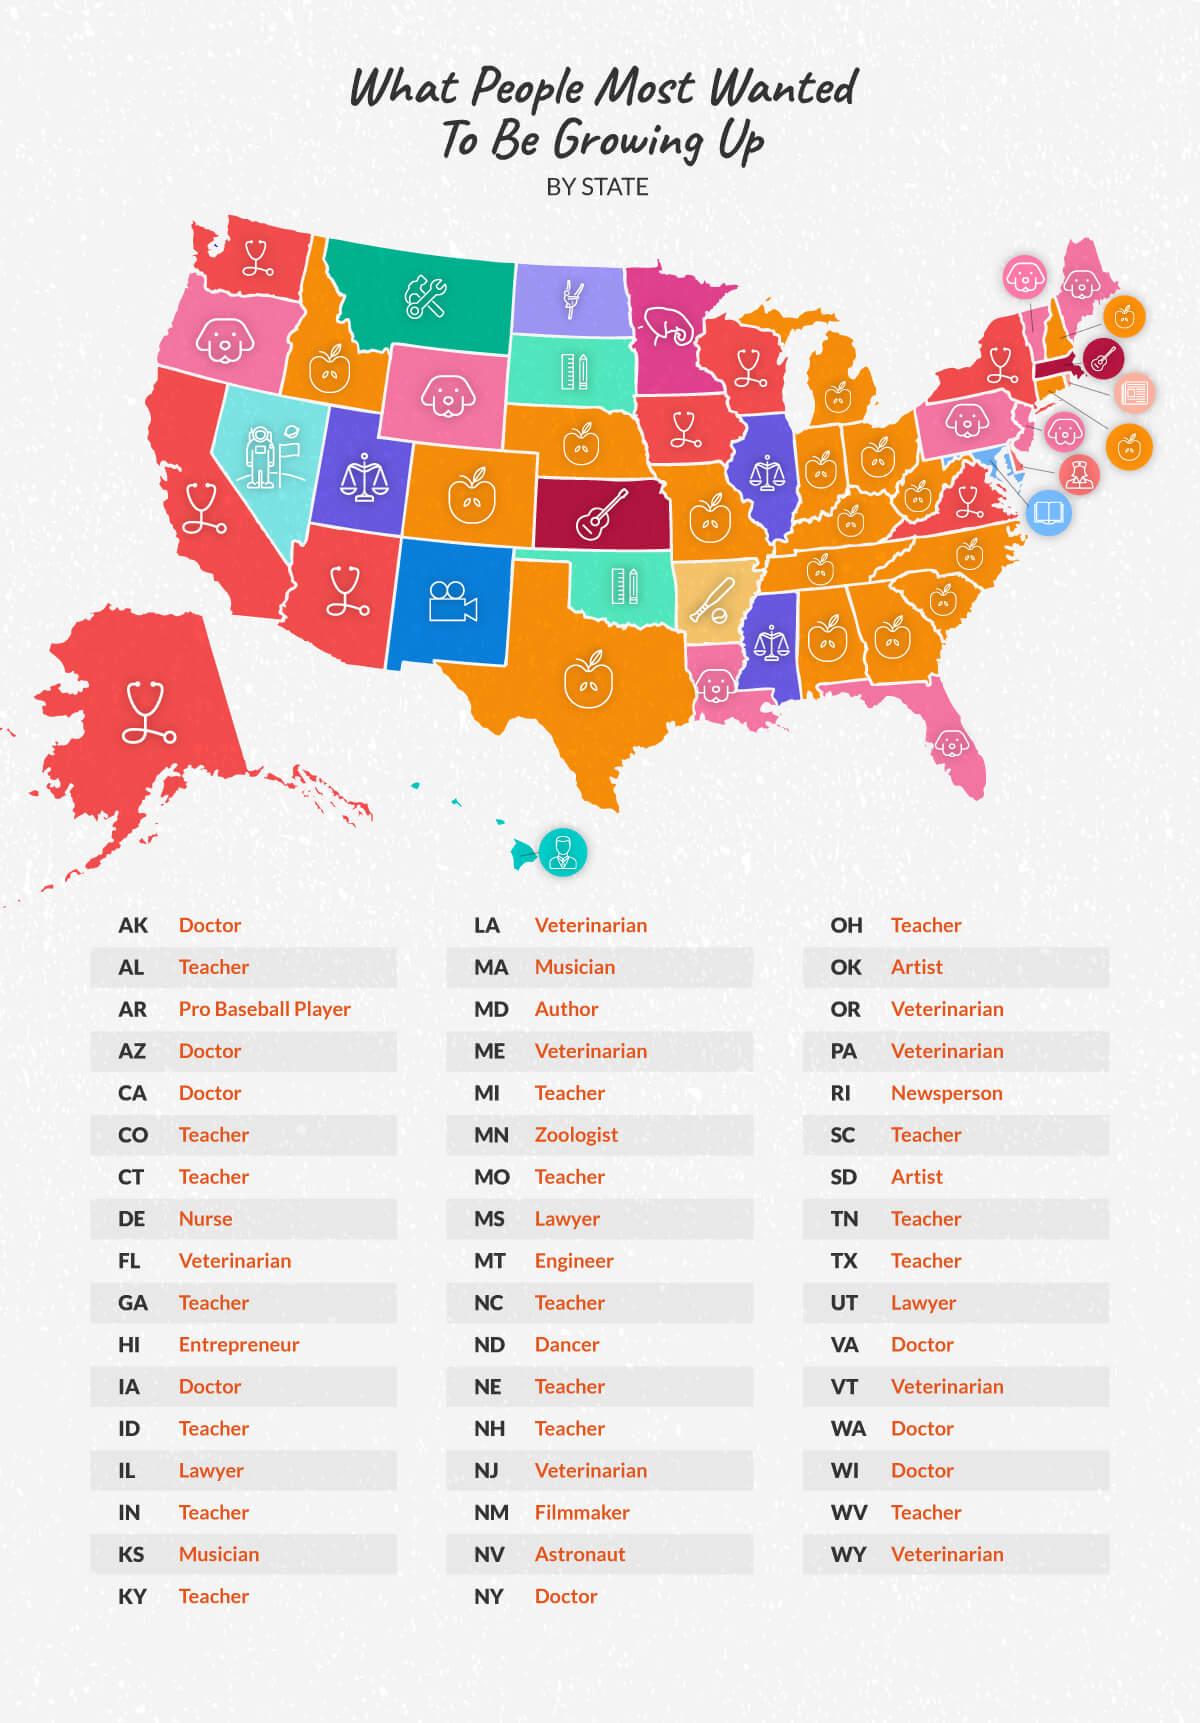 U.S map showing what people wanted to be growing up by state